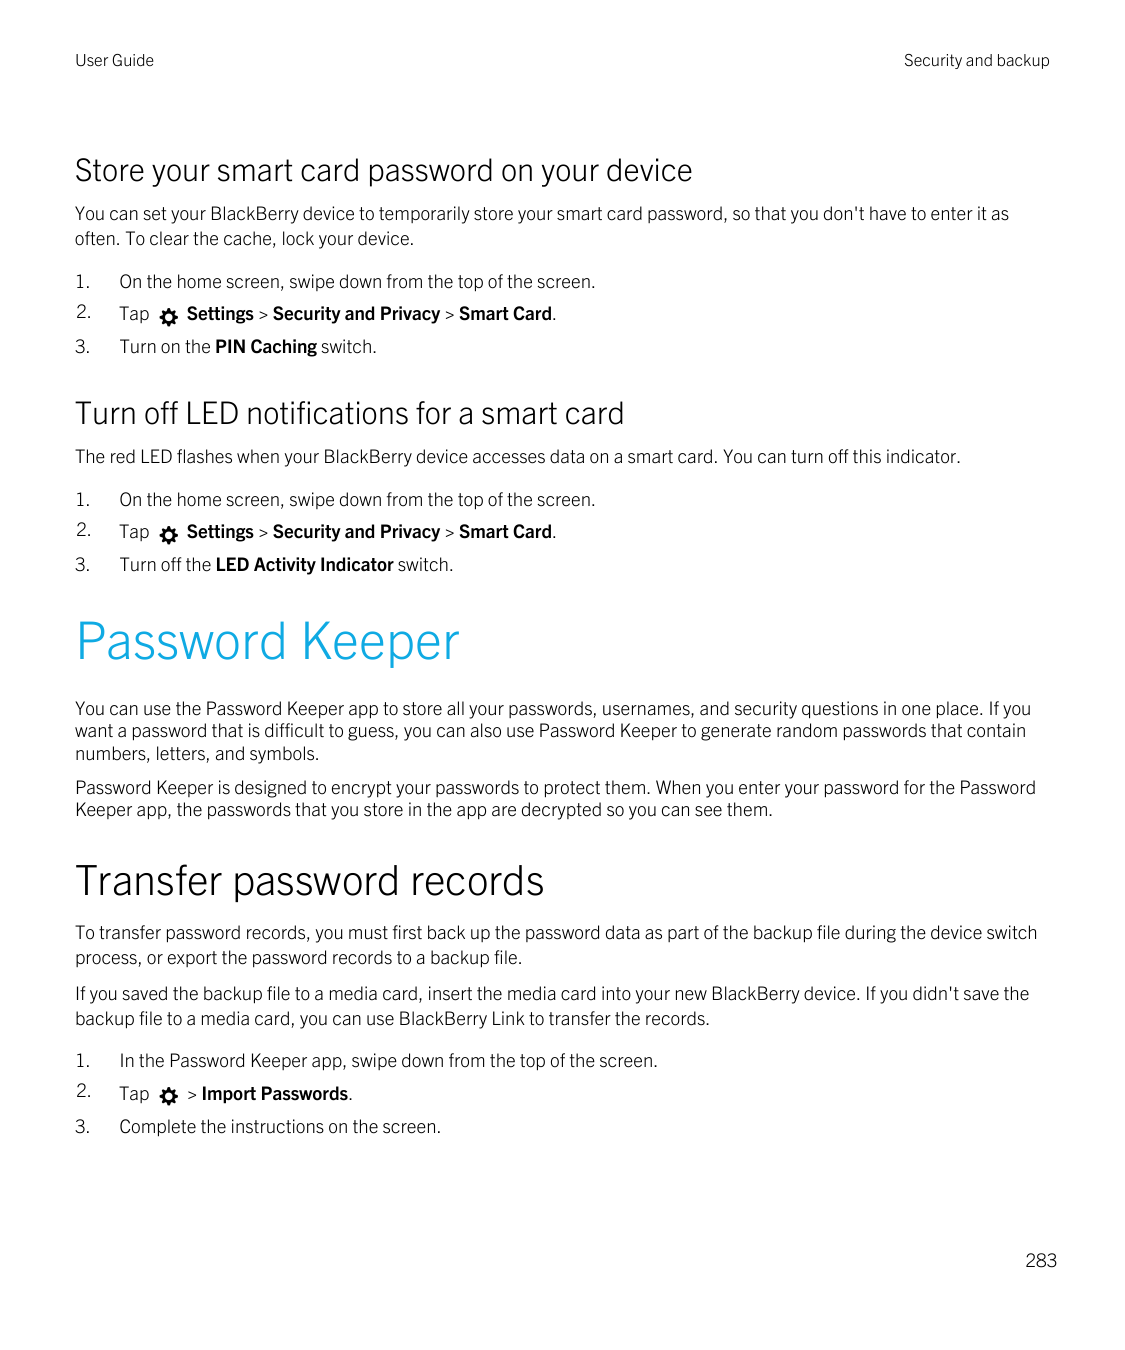 User GuideSecurity and backupStore your smart card password on your deviceYou can set your BlackBerry device to temporarily stor